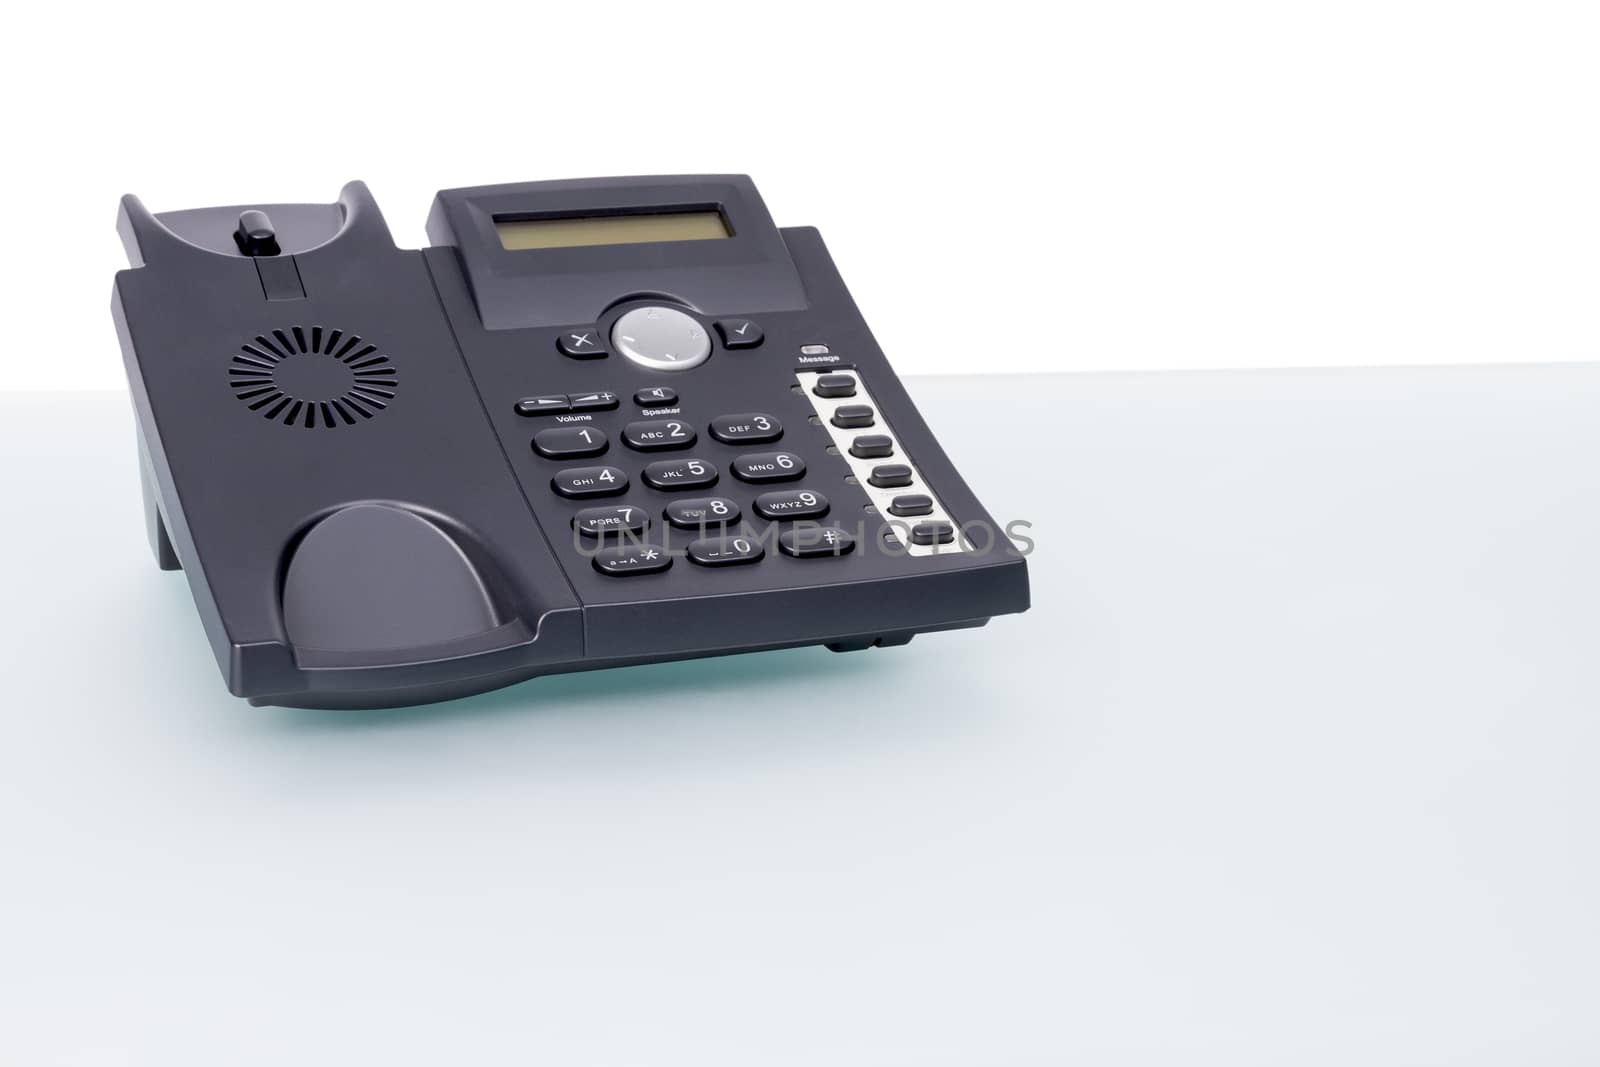 modern voip phone standing on glass desk. horizontal picture with copy-space